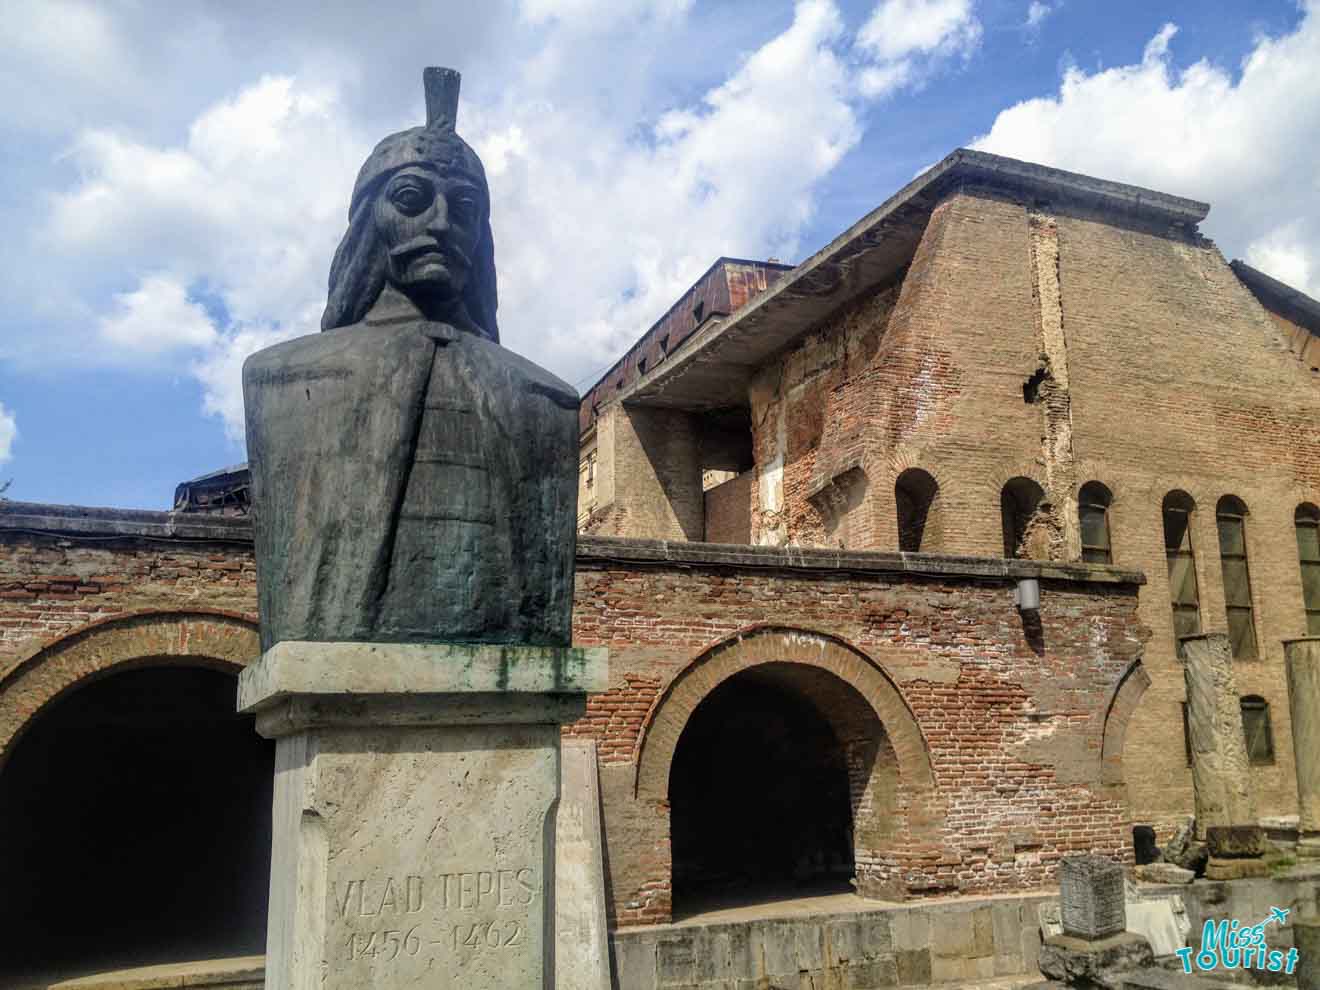 A bronze bust of Vlad Tepes (Vlad the Impaler) with the years 1456-1462 engraved, set against the backdrop of an old brick building, evoking a sense of history and legend